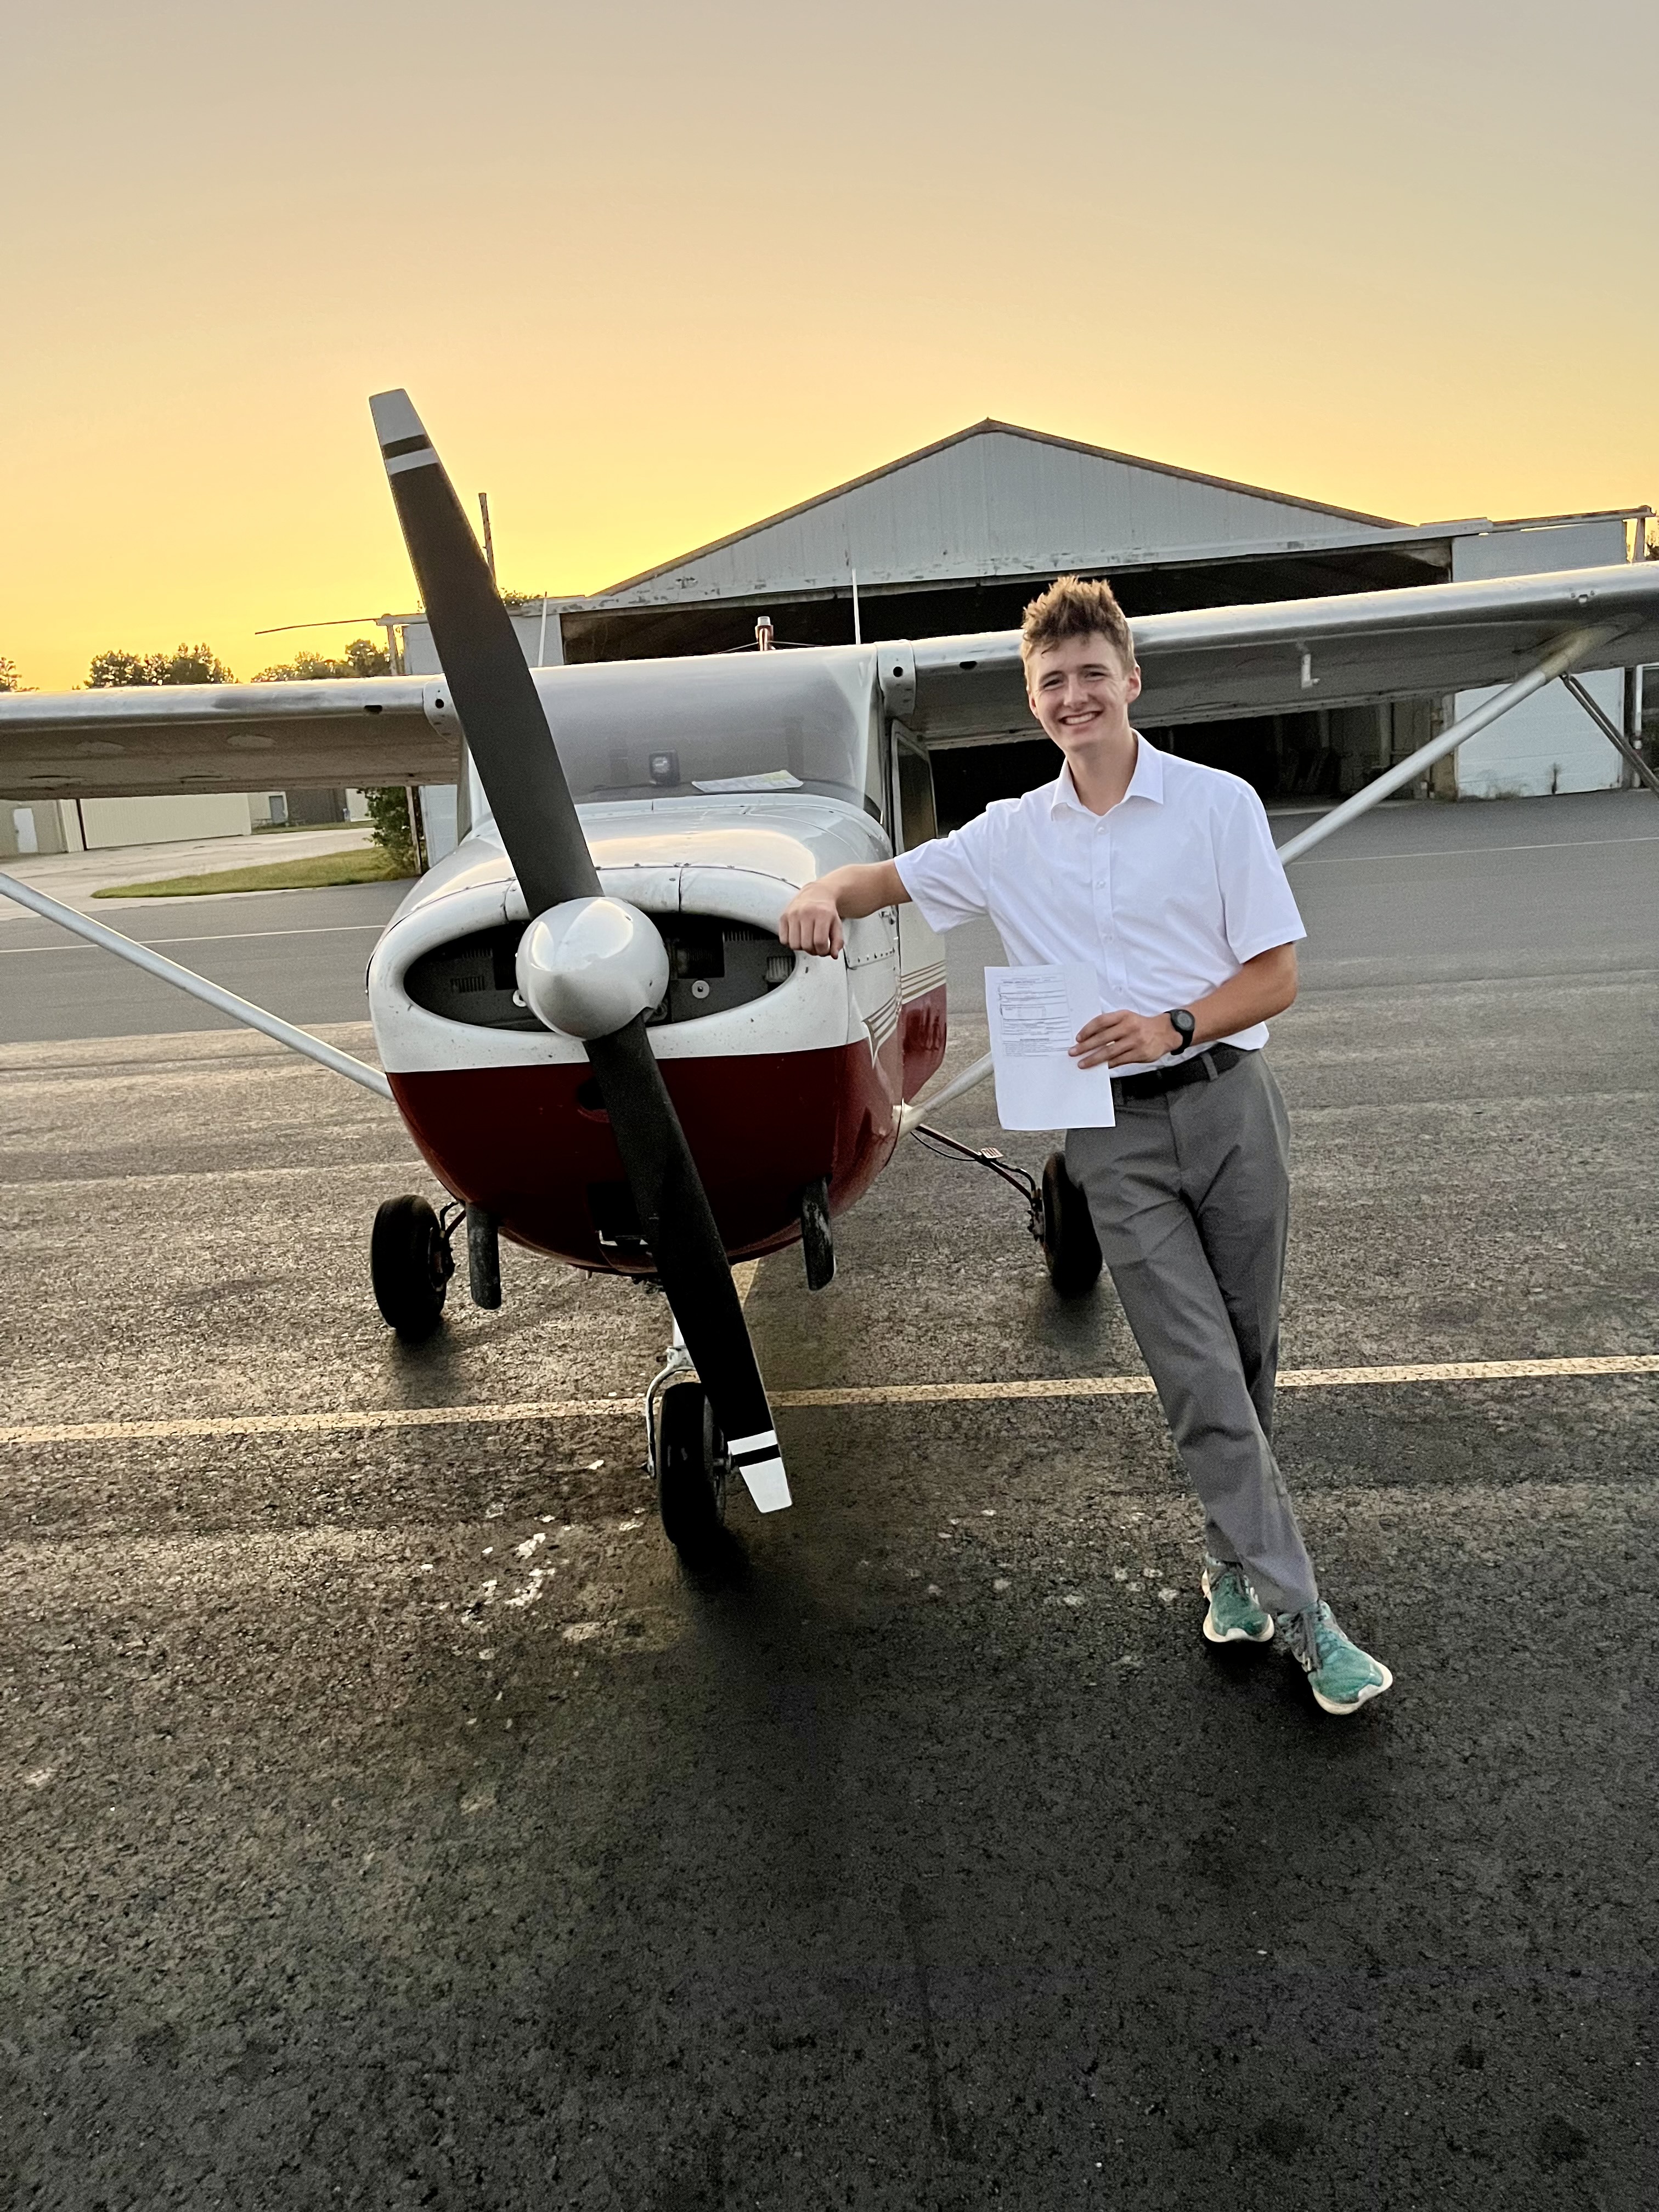 Mathew Lynes, EAA Chapter 54's first Ray Scholarship winner, poses with his plane after passing a checkride